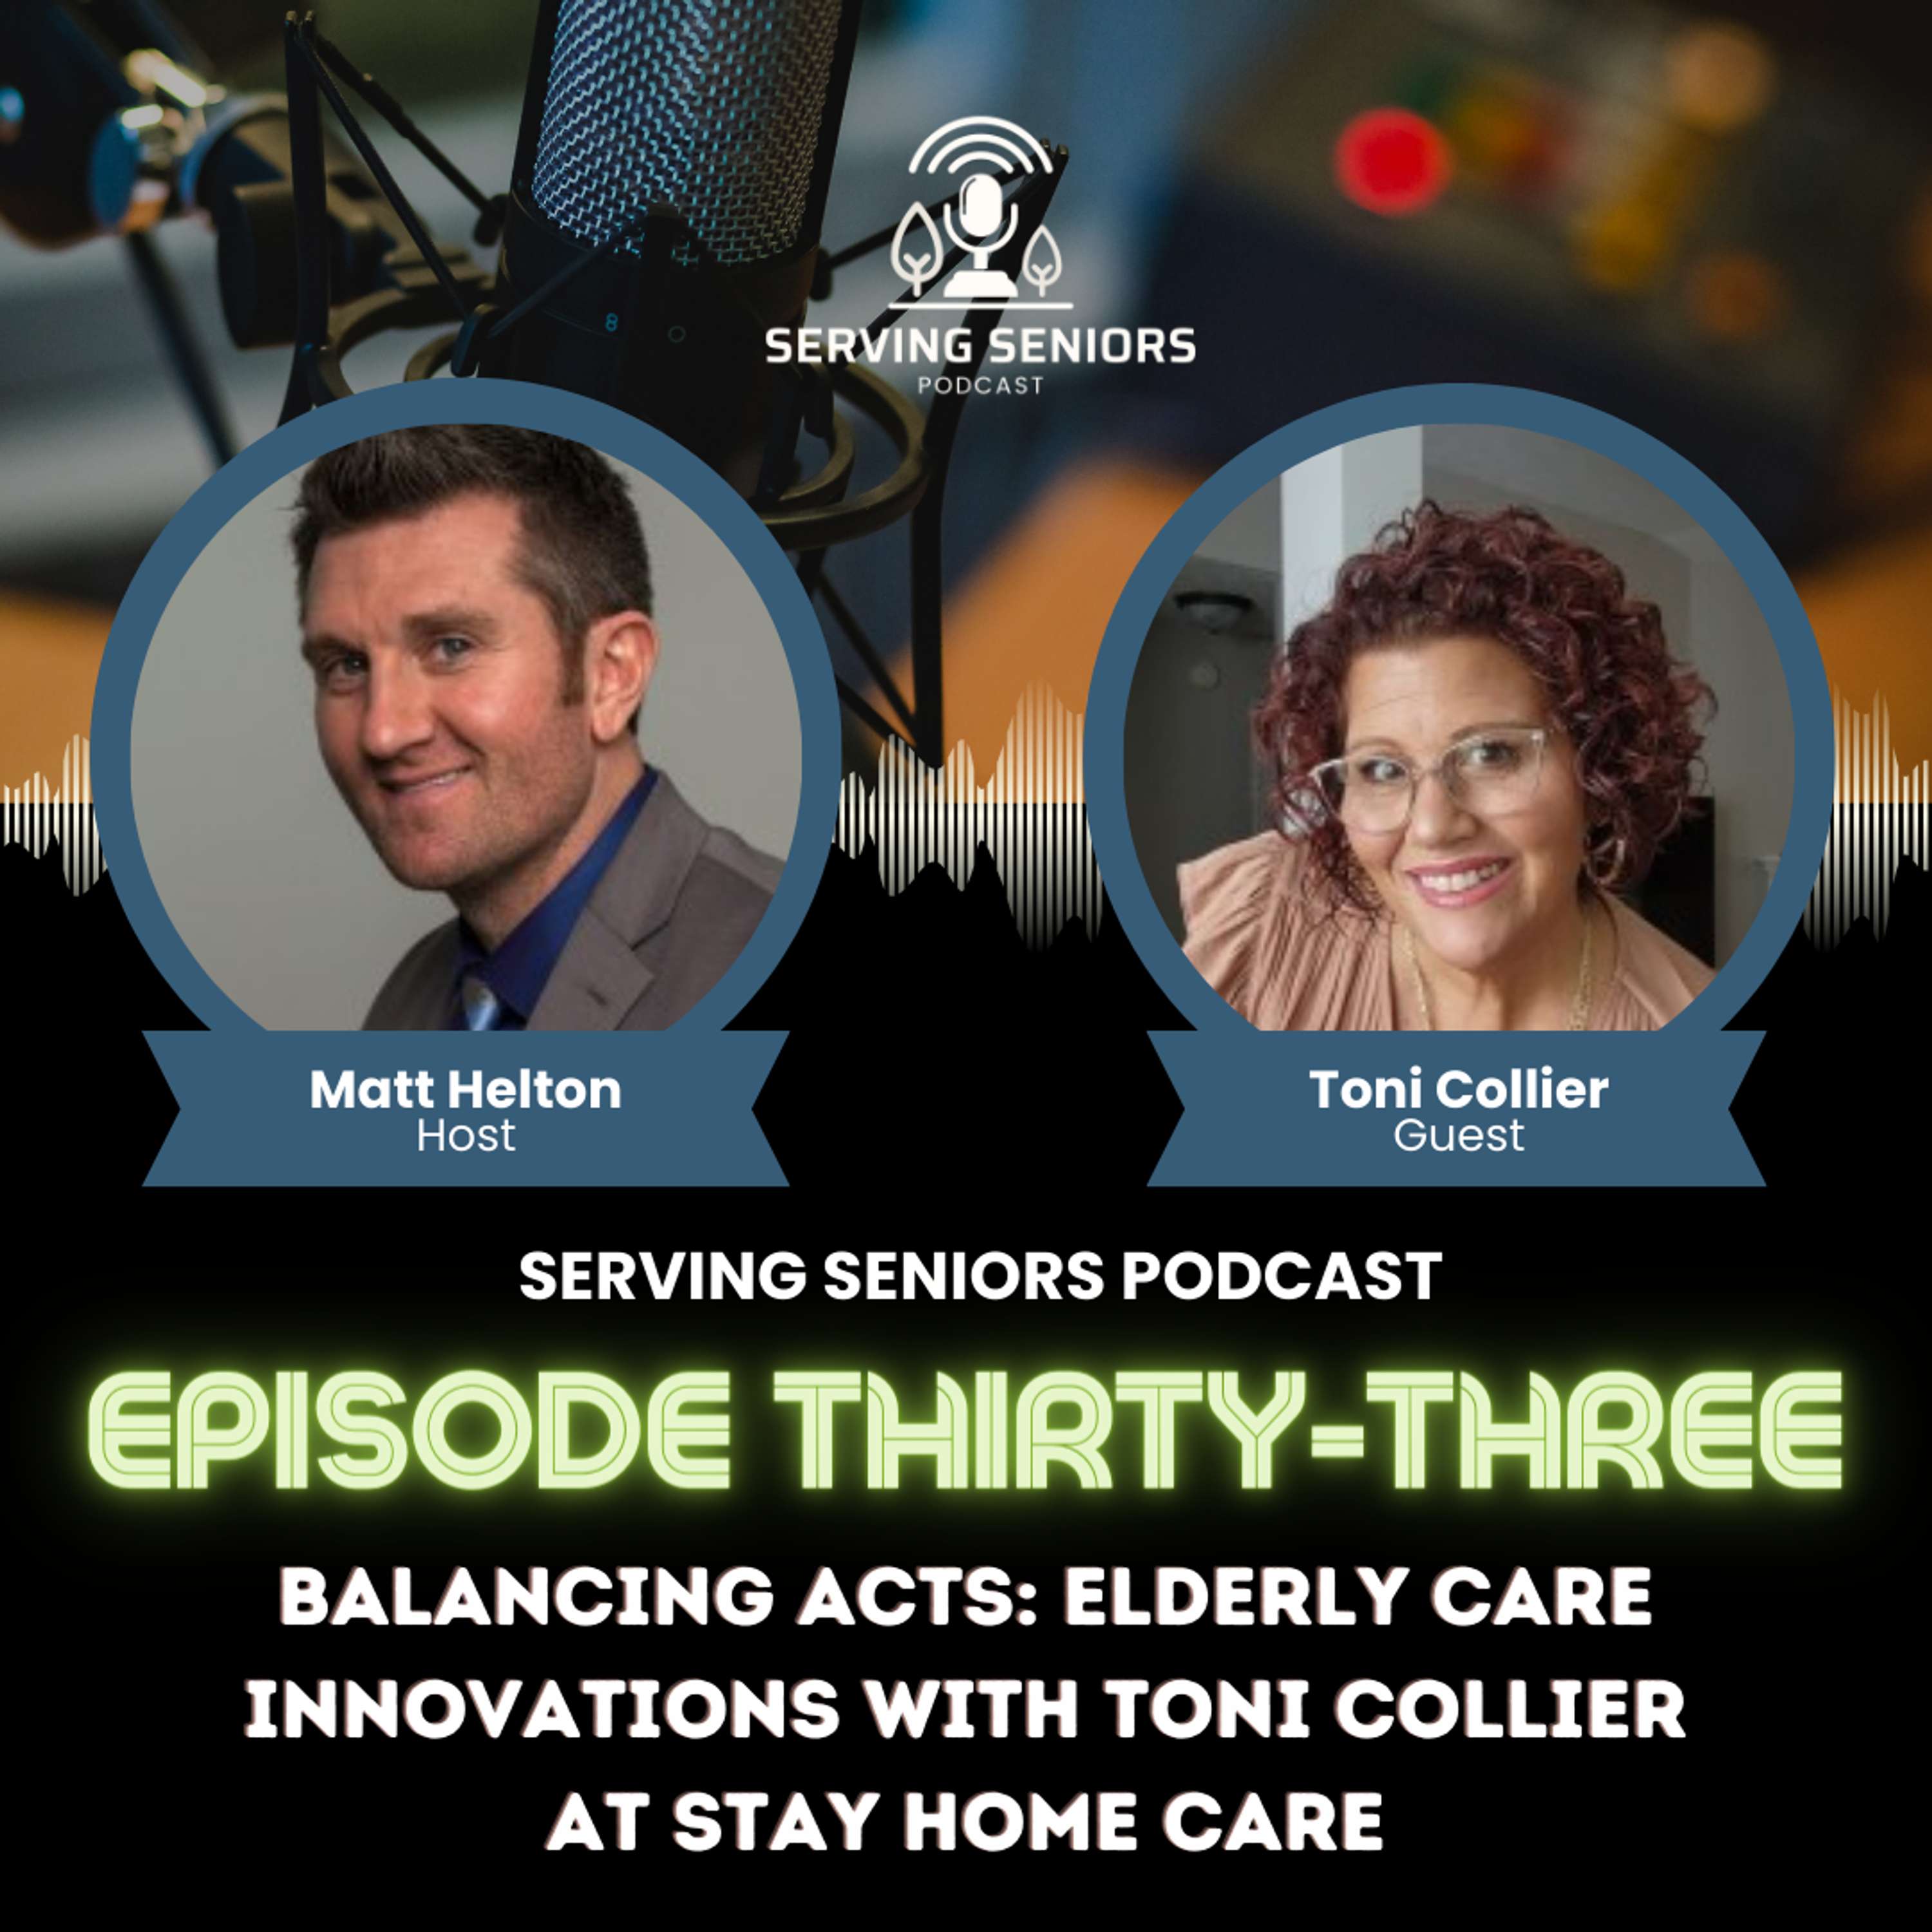 Episode 33: Balancing Acts: Elderly Care Innovations with Toni Collier at Stay Home Care